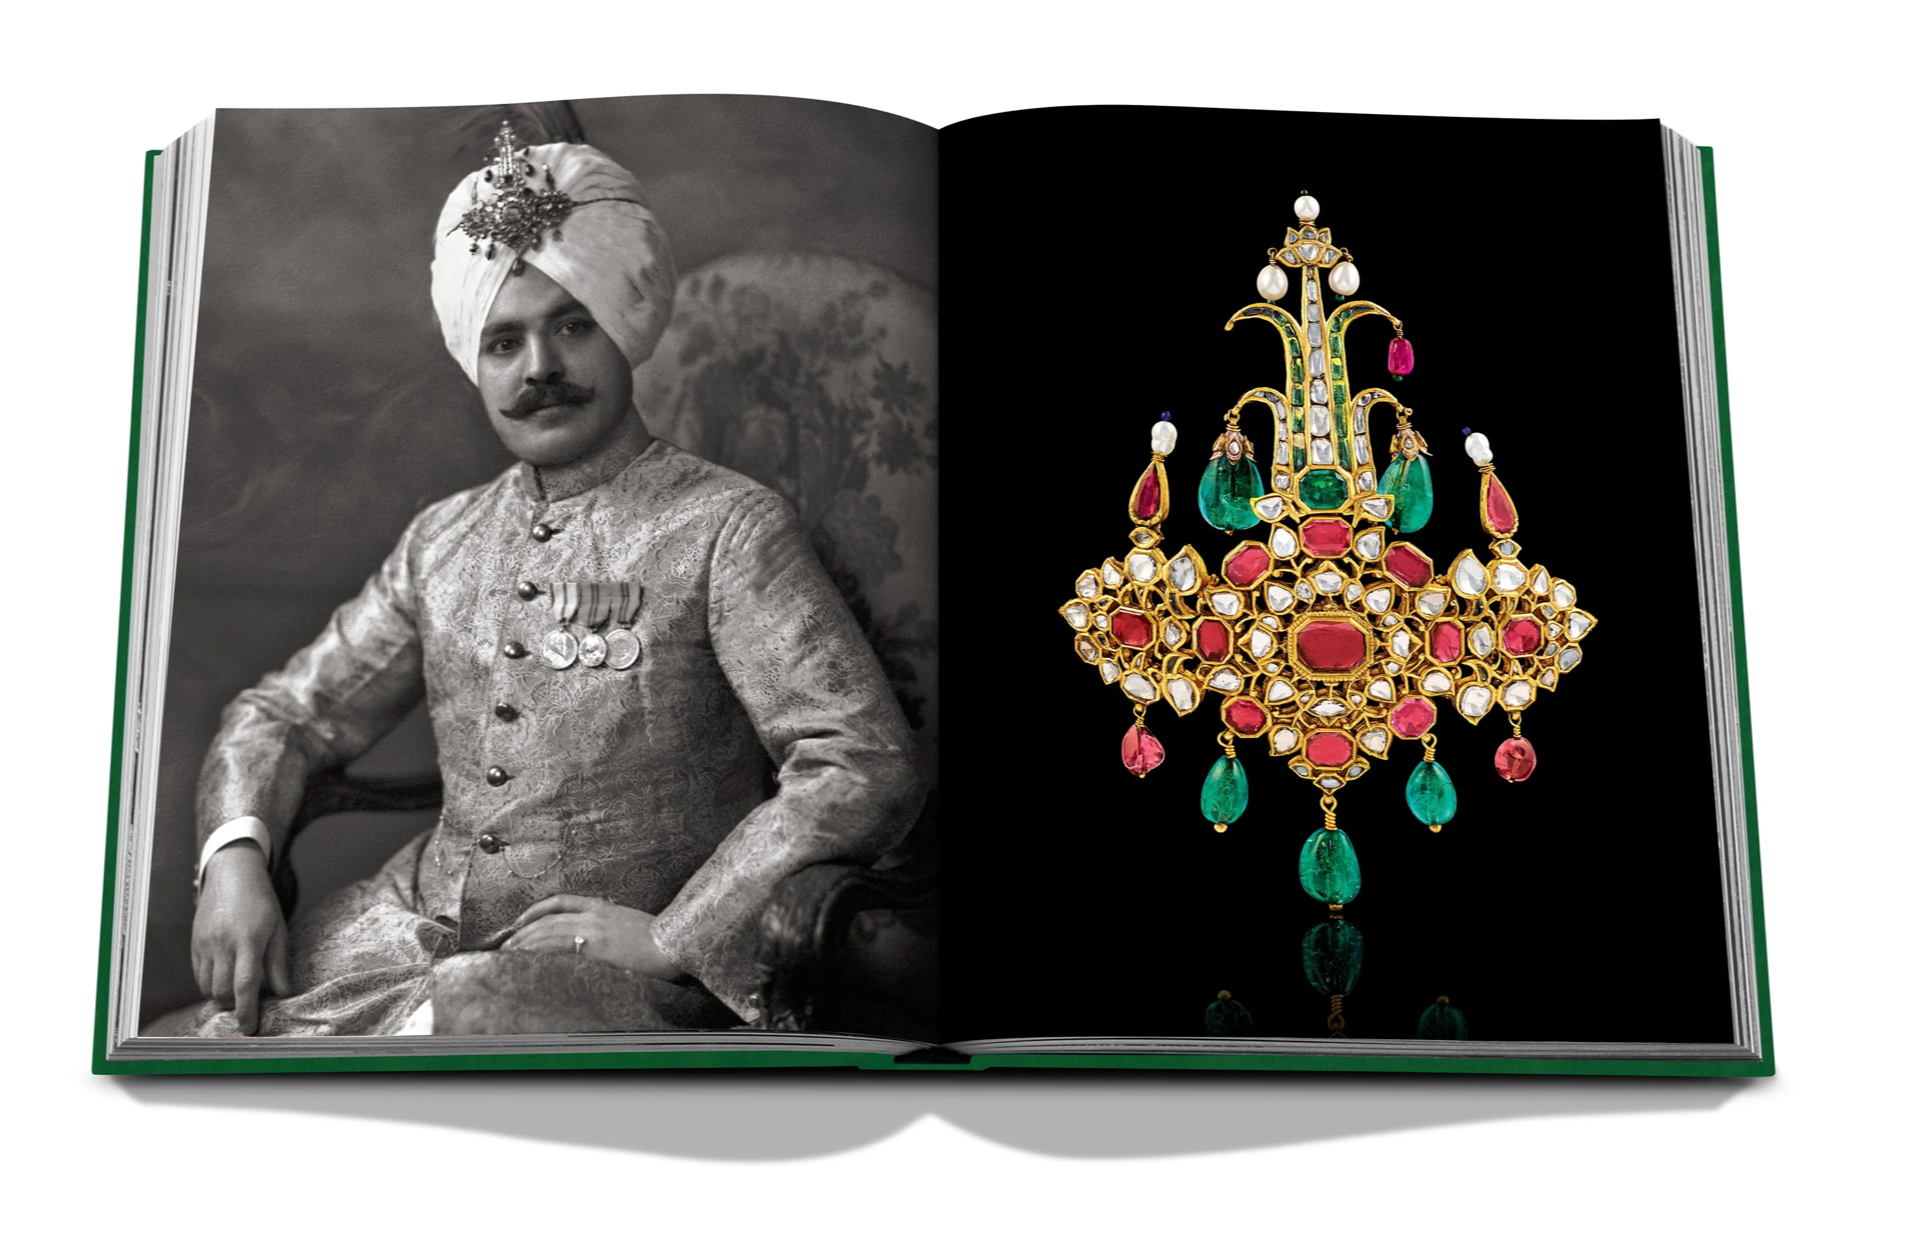 Beyond Extravagance (set of 2) - A Royal Collection of Gems and Jewels